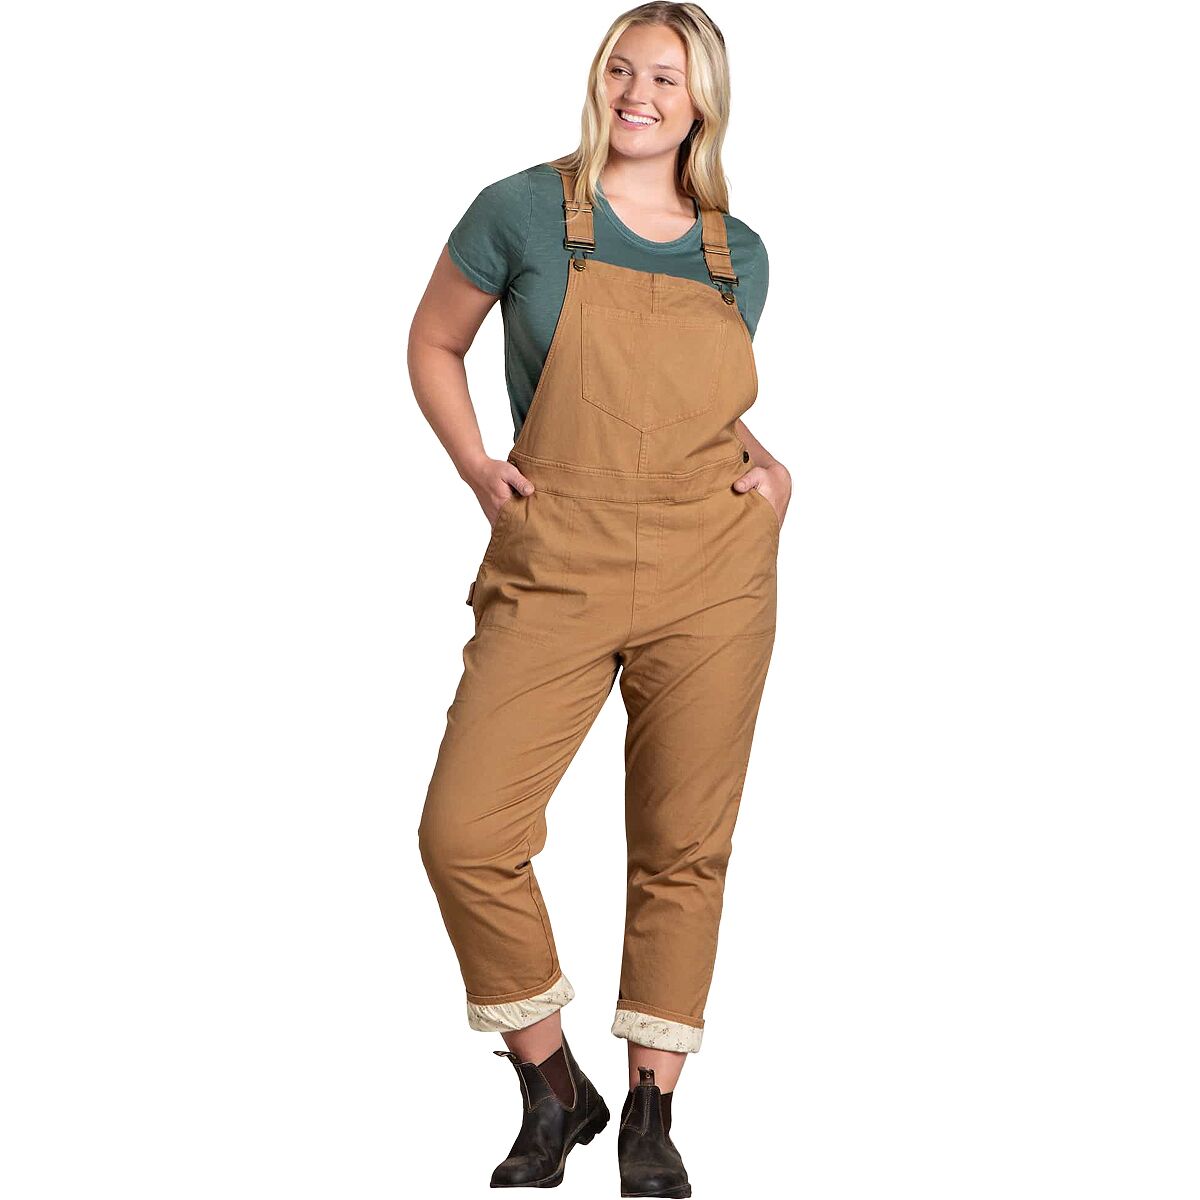 Bramble Flannel Lined Overall - Women